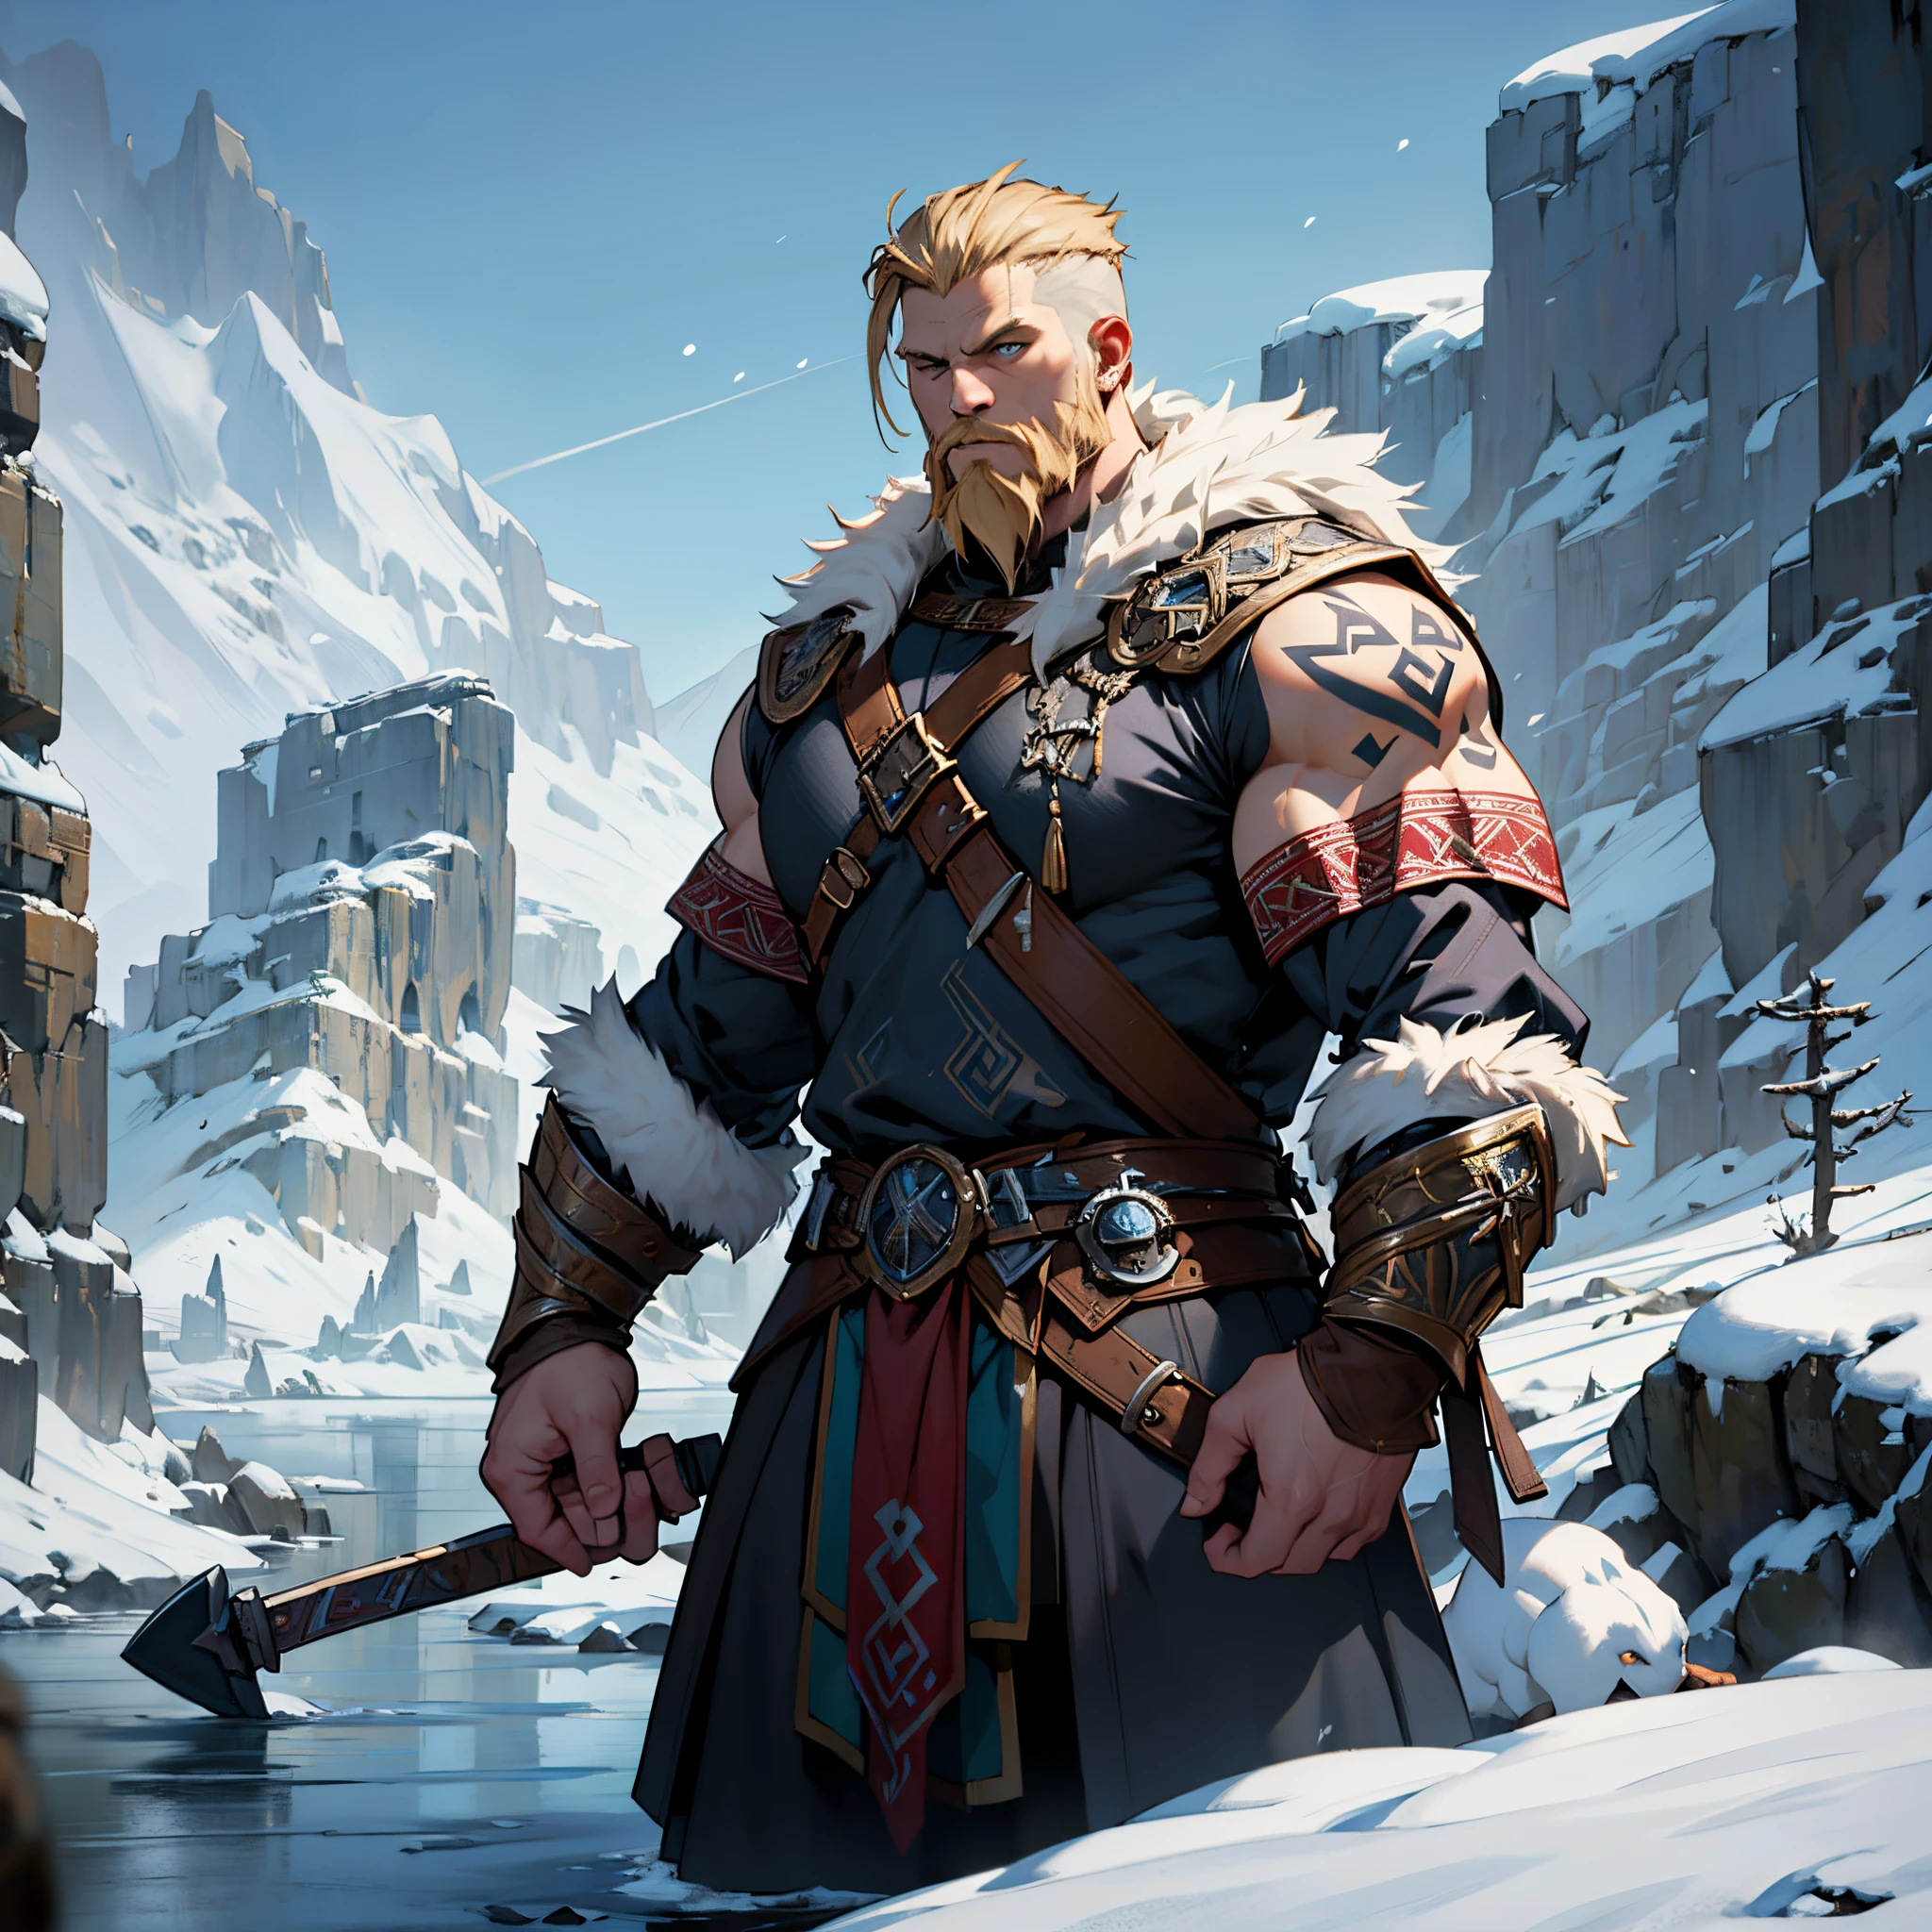 ​masterpiece, Best Quality, detailed, Cinematics, 4k, Background with:Viking buildings built on snowy fjord cliffs, Viking warrior wearing armor and fur coat with rune tattoos